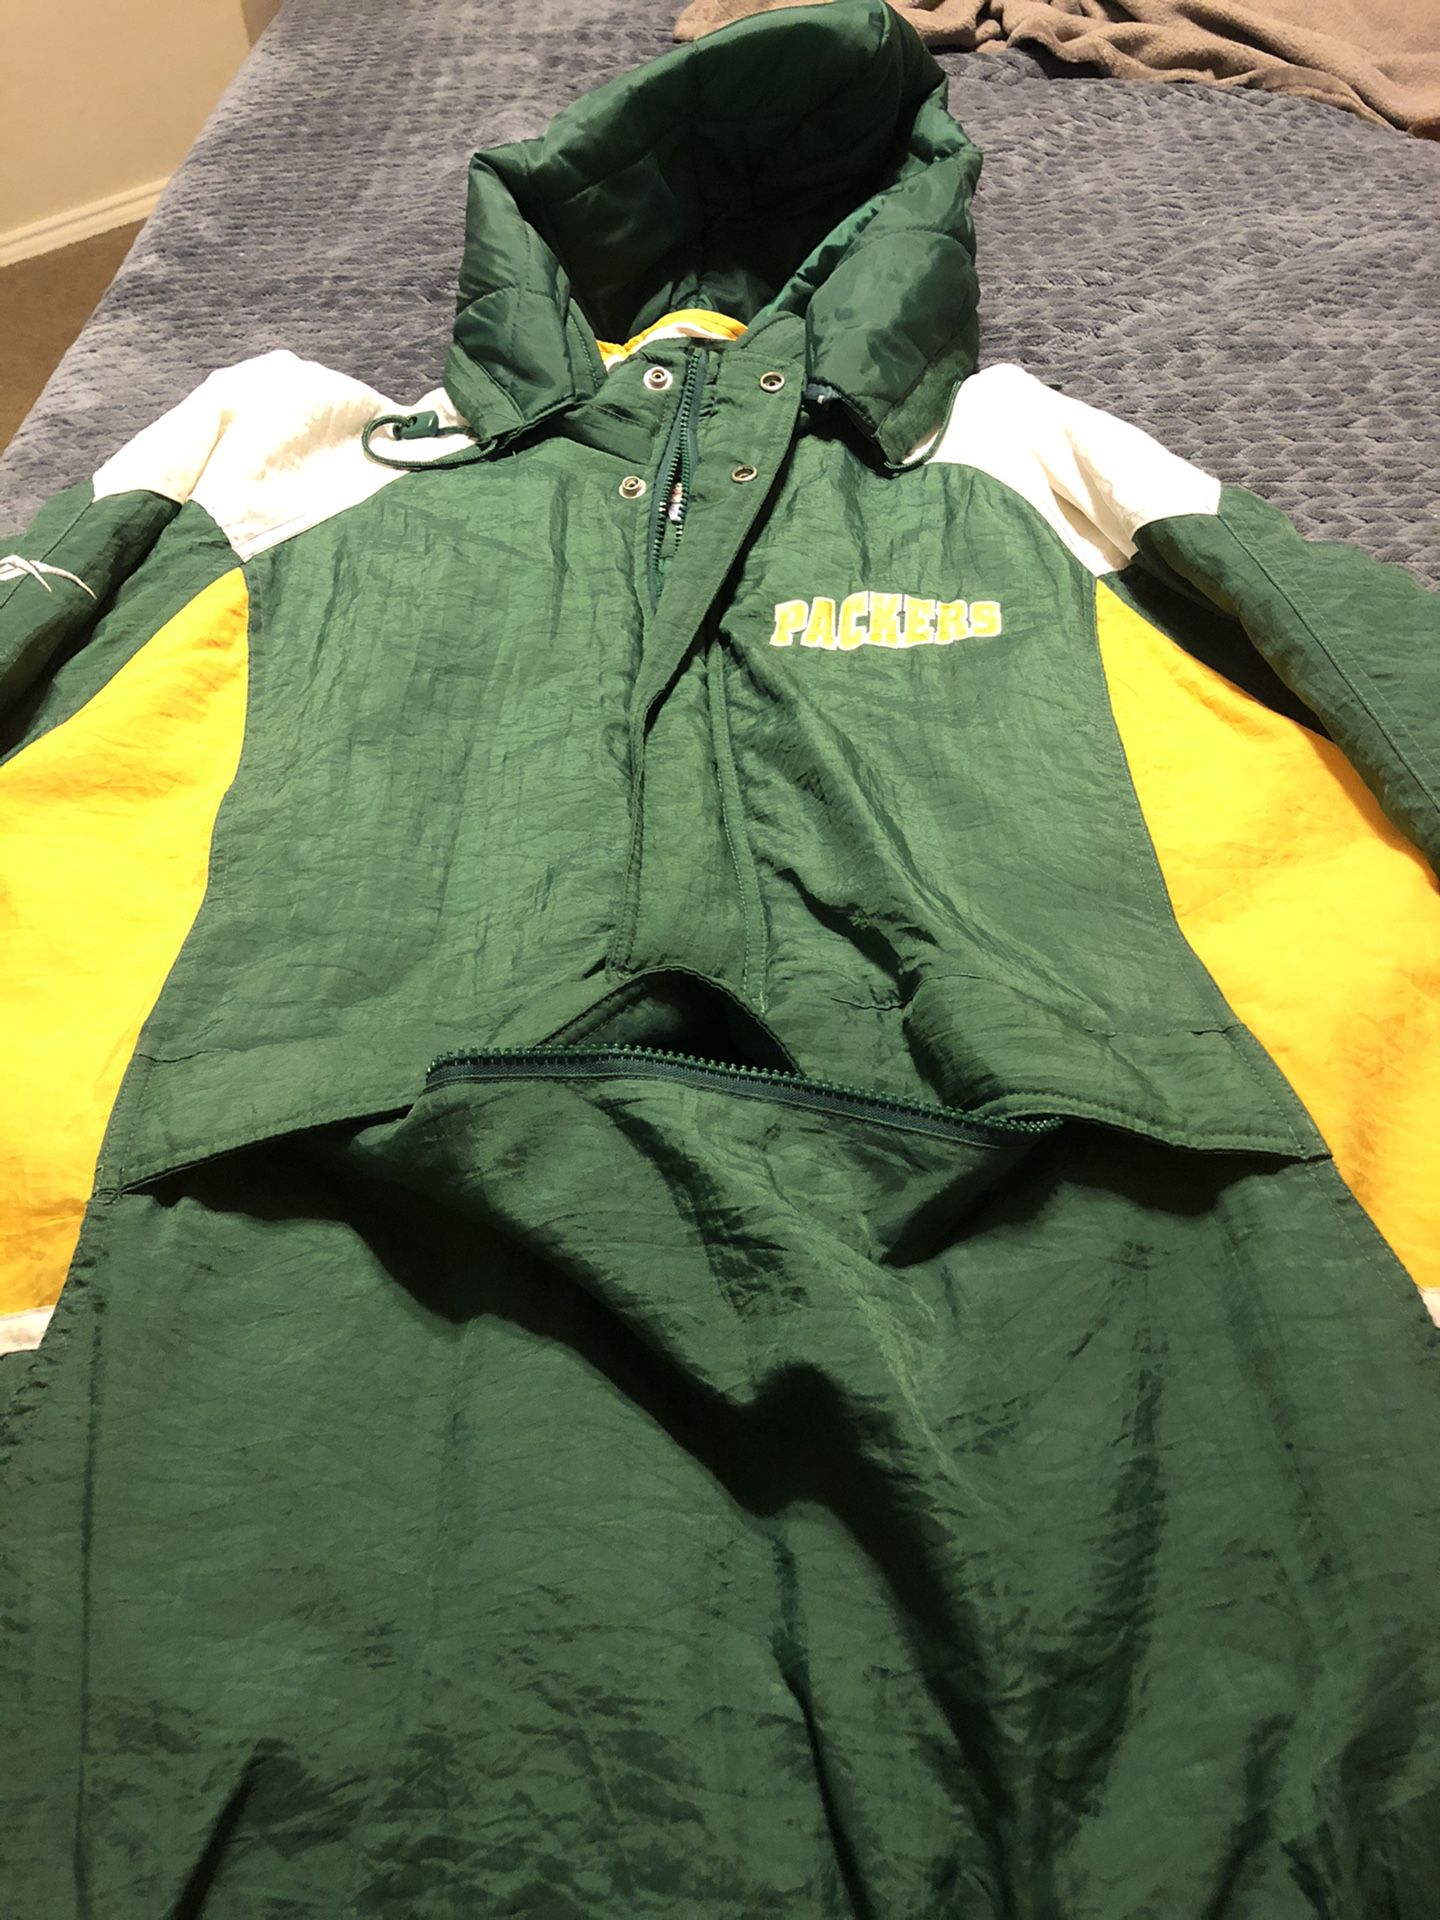 Green Bay Packers Reebok Pullover Hoodie Size Large 1/2 zip 1990s! Like New!